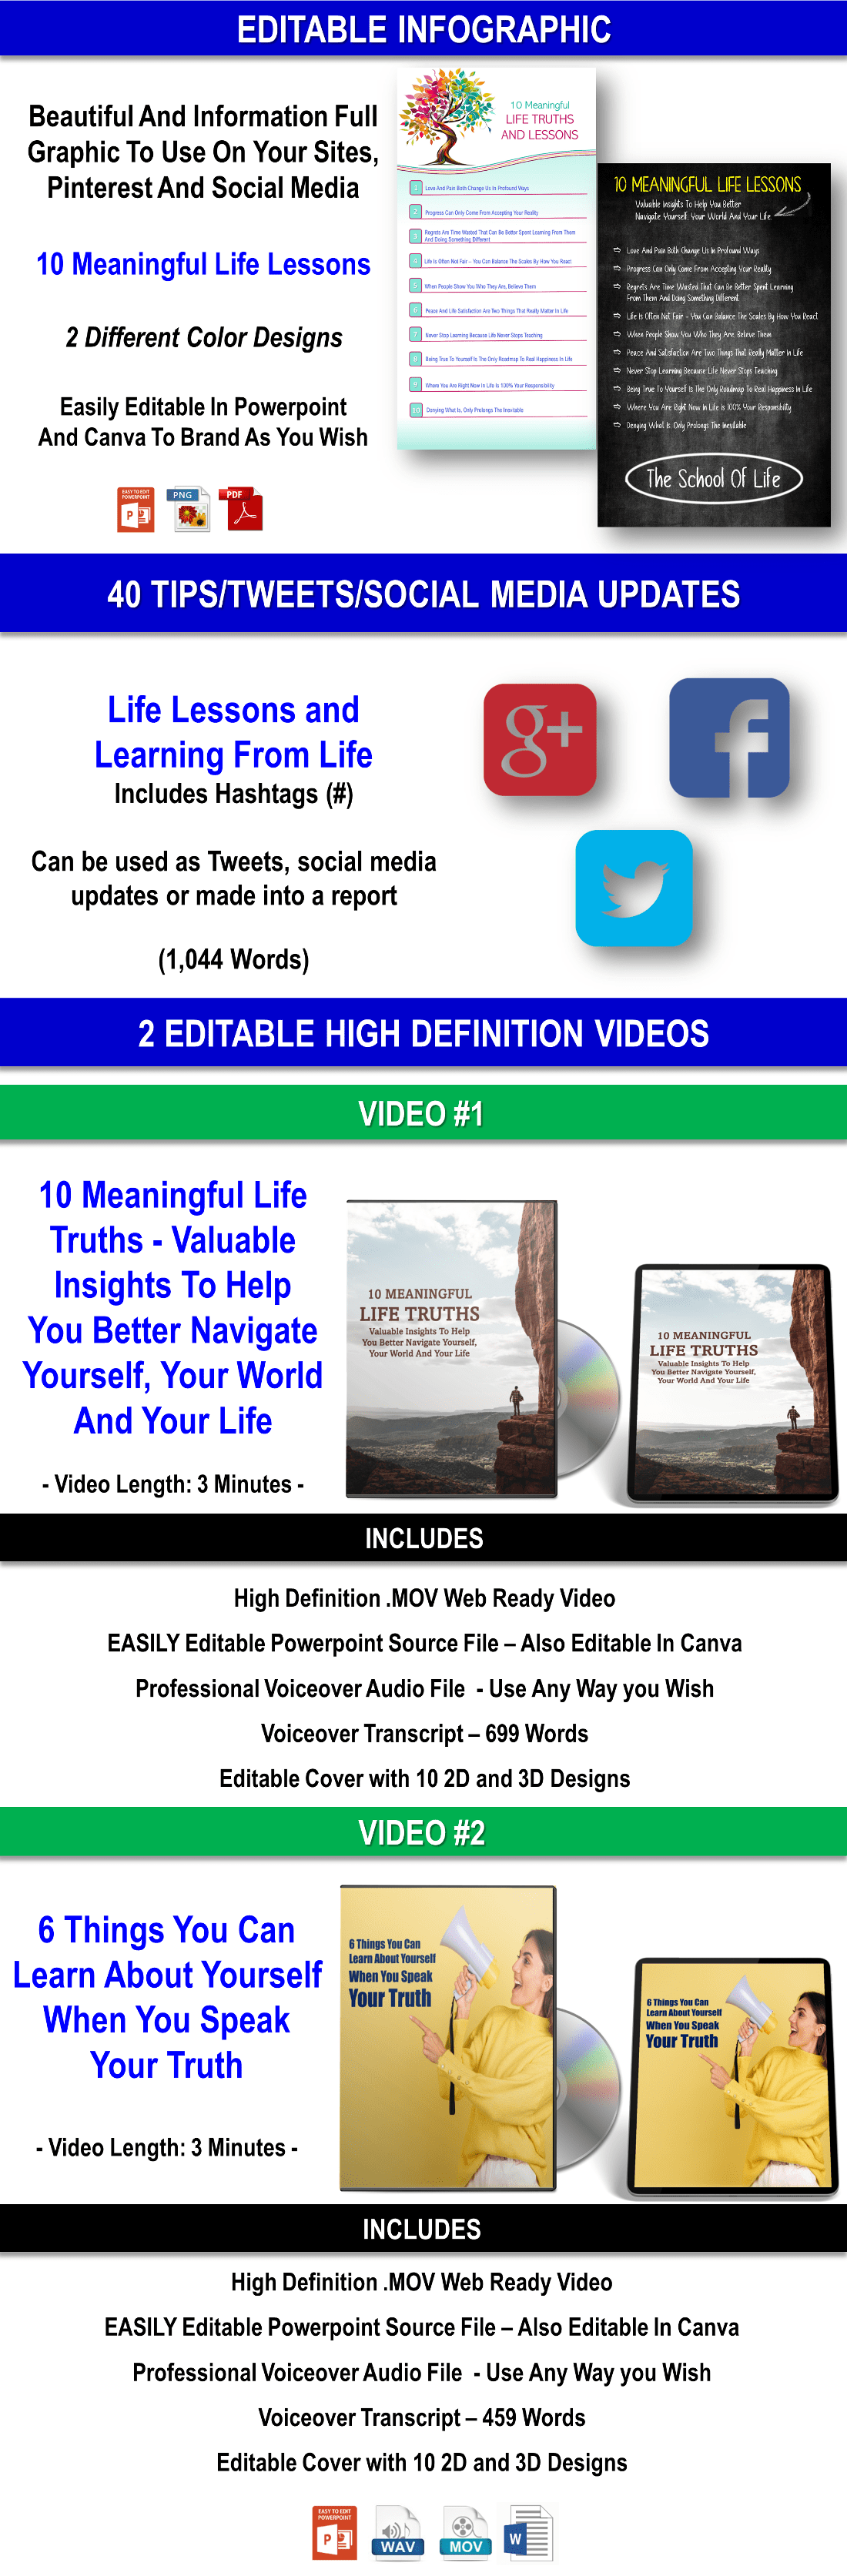 10 Meaningful Life Truths – Valuable Lessons And Insights To Help You Better Navigate Yourself, Your World And Your Life Content Pack with PLR Rights